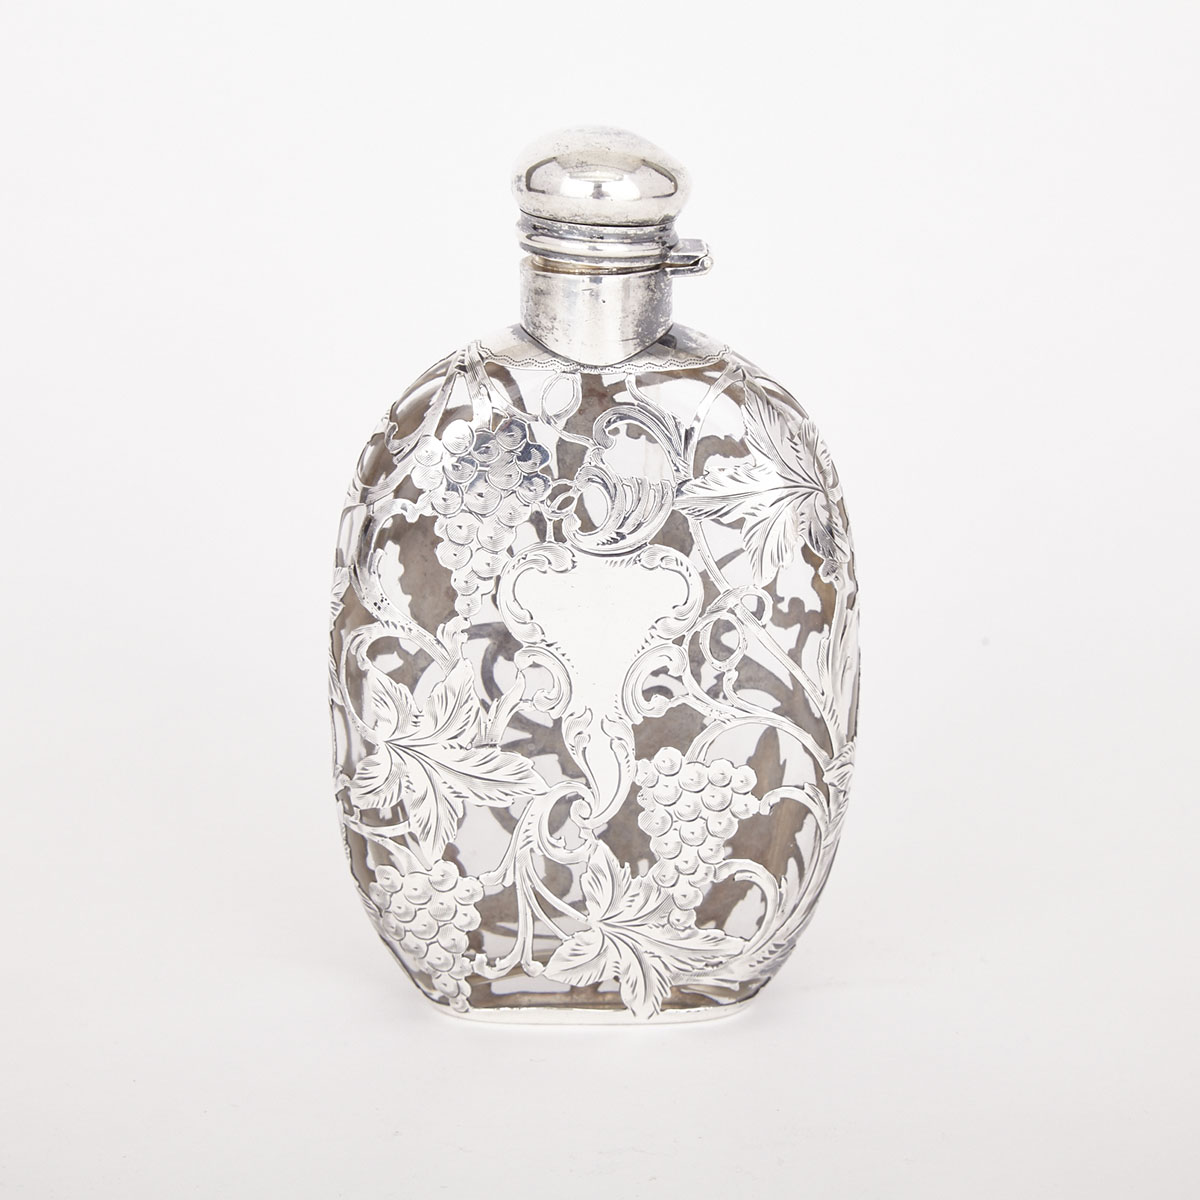 American Silver Overlaid Glass Spirit Flask, Alvin Manufacturing Co., c.1900